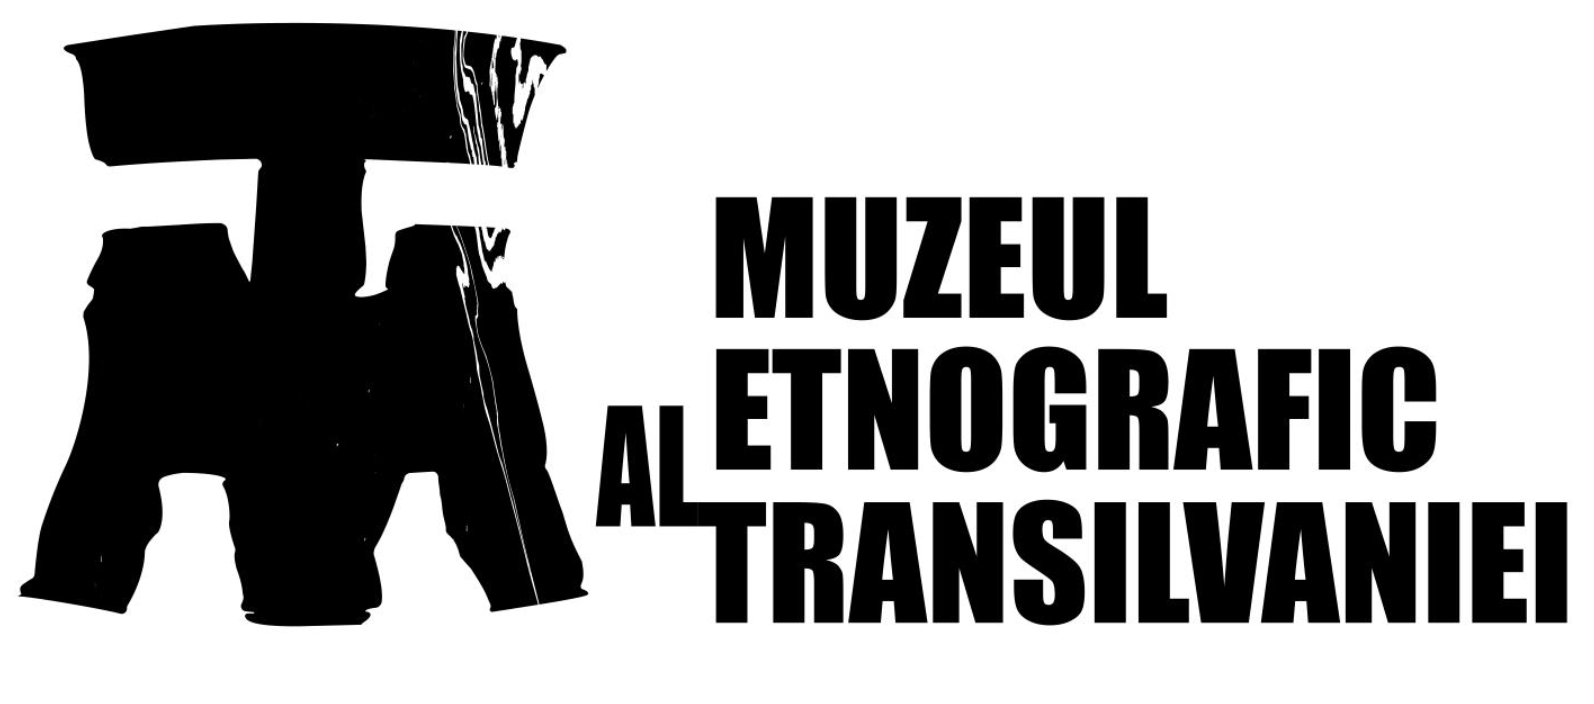 Project Partner logo - The Transylvanian Museum of Ethnography